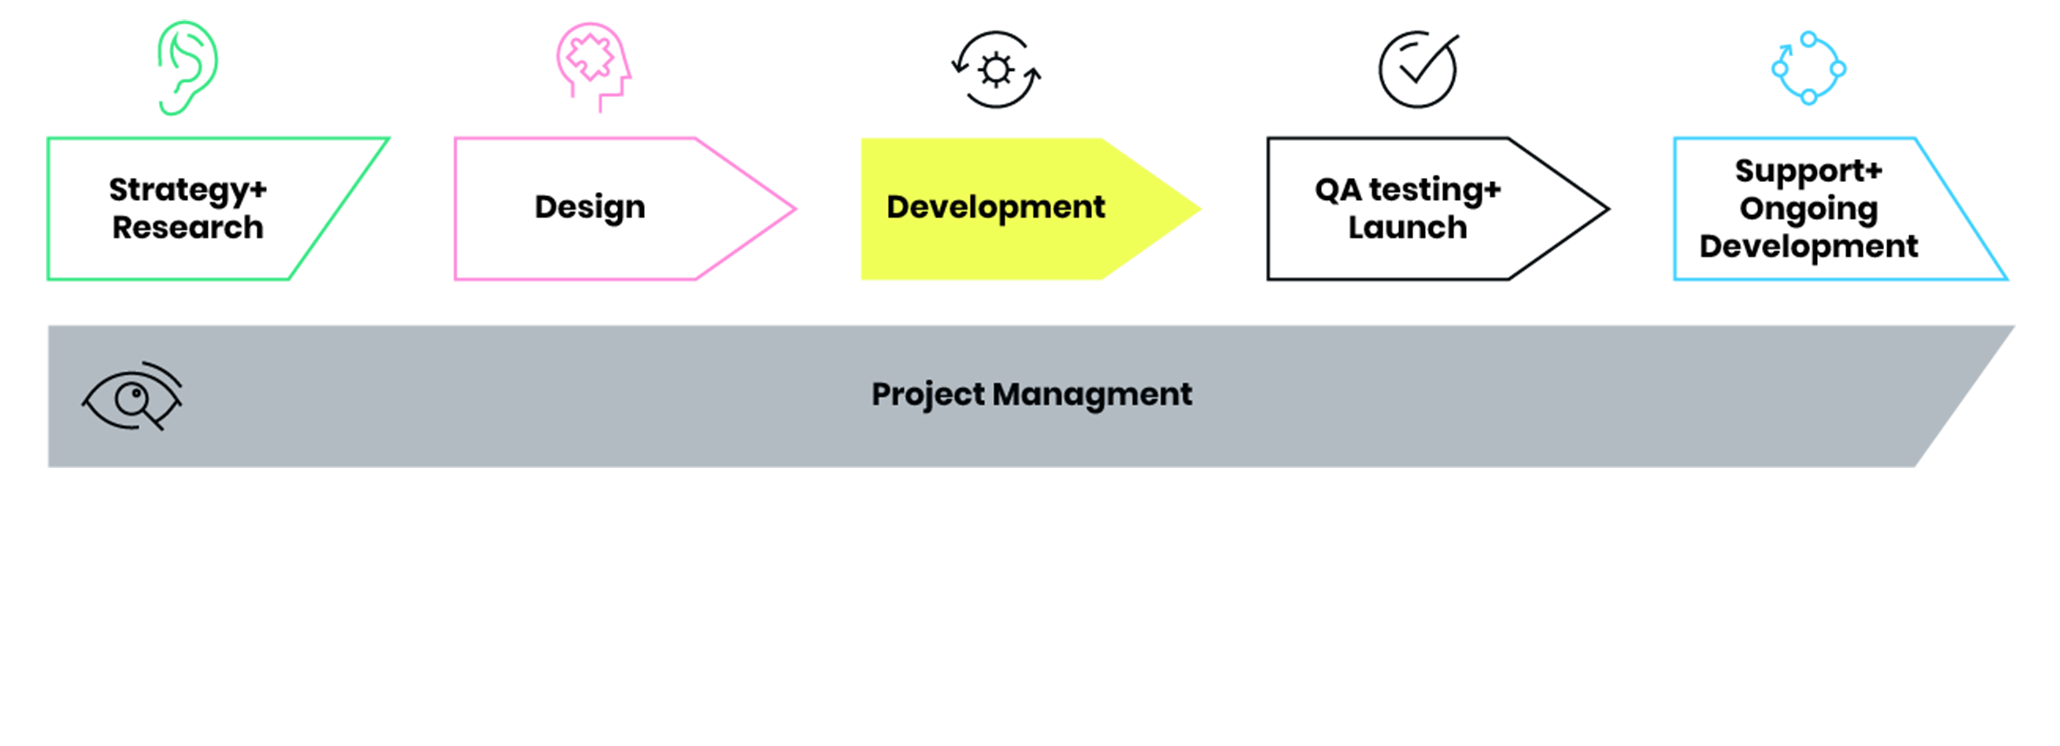 Diagram showing the waterfall process for a website design and build project